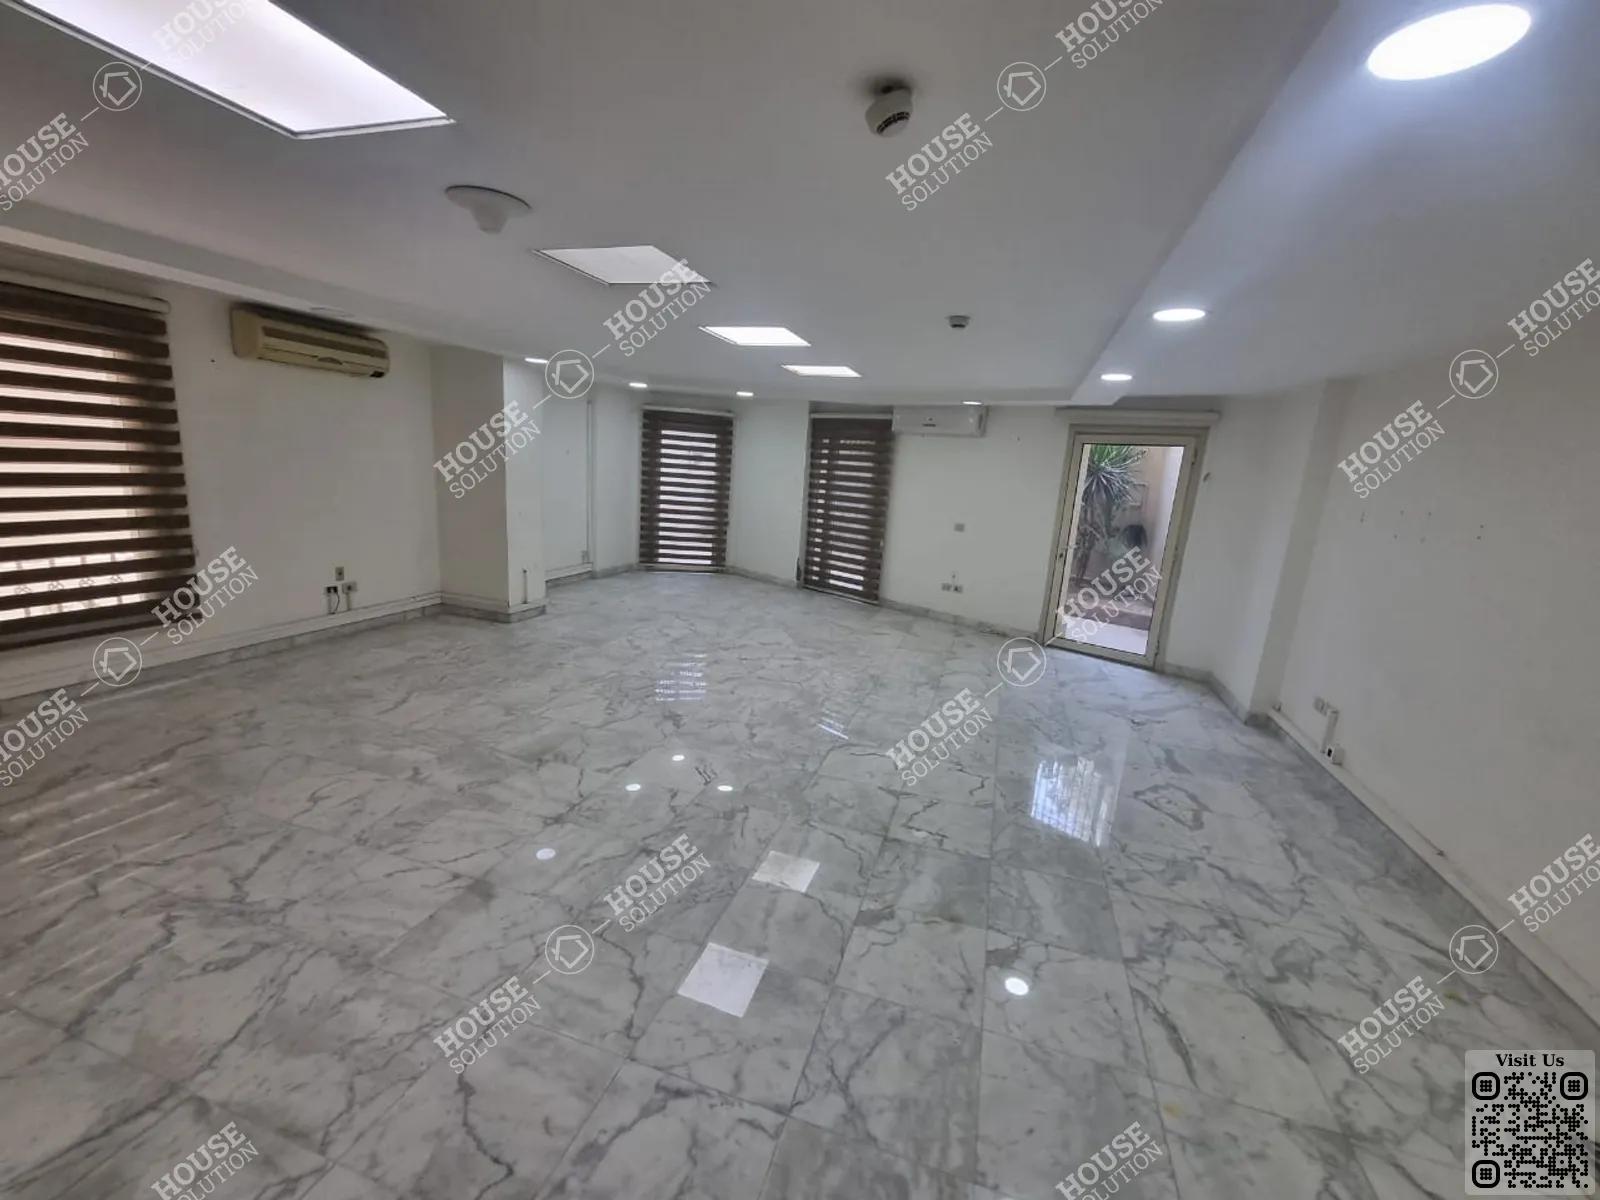 RECEPTION  @ Office spaces For Rent In Maadi Maadi Sarayat Area: 409 m² consists of 6 Bedrooms 4 Bathrooms Semi furnished 5 stars #5698-1